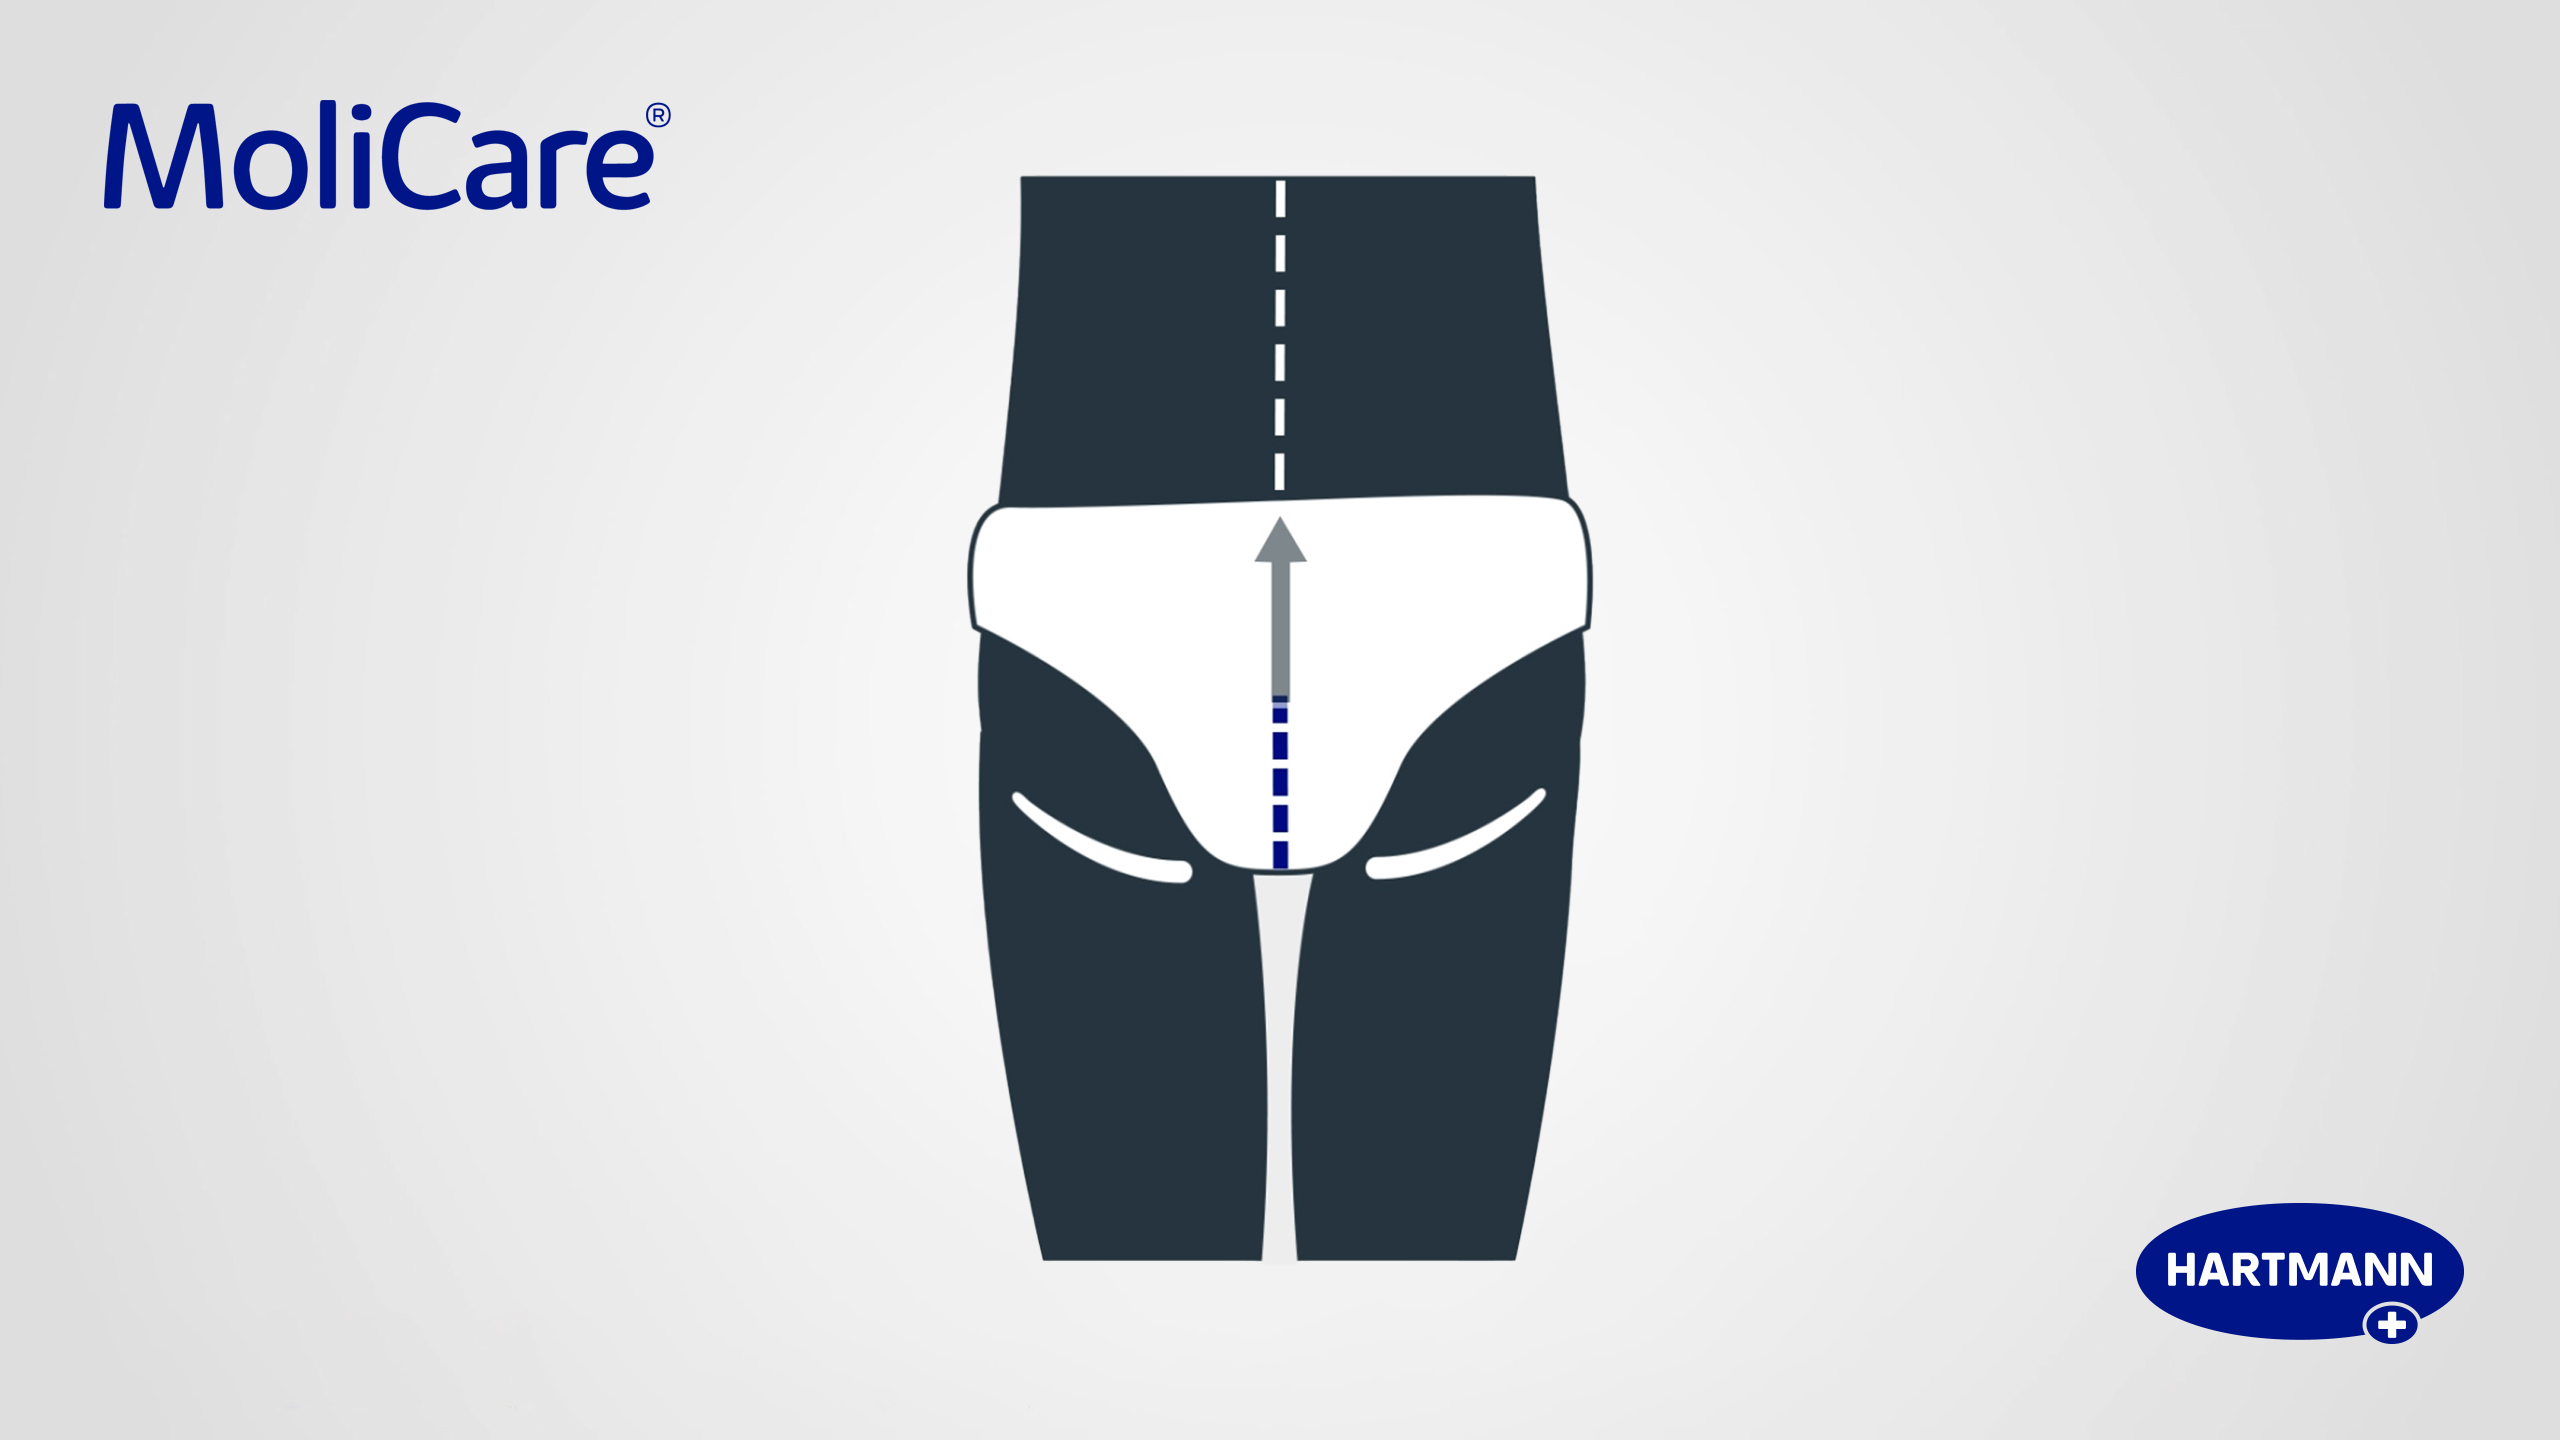 How to correctly apply MoliCare® incontinence products